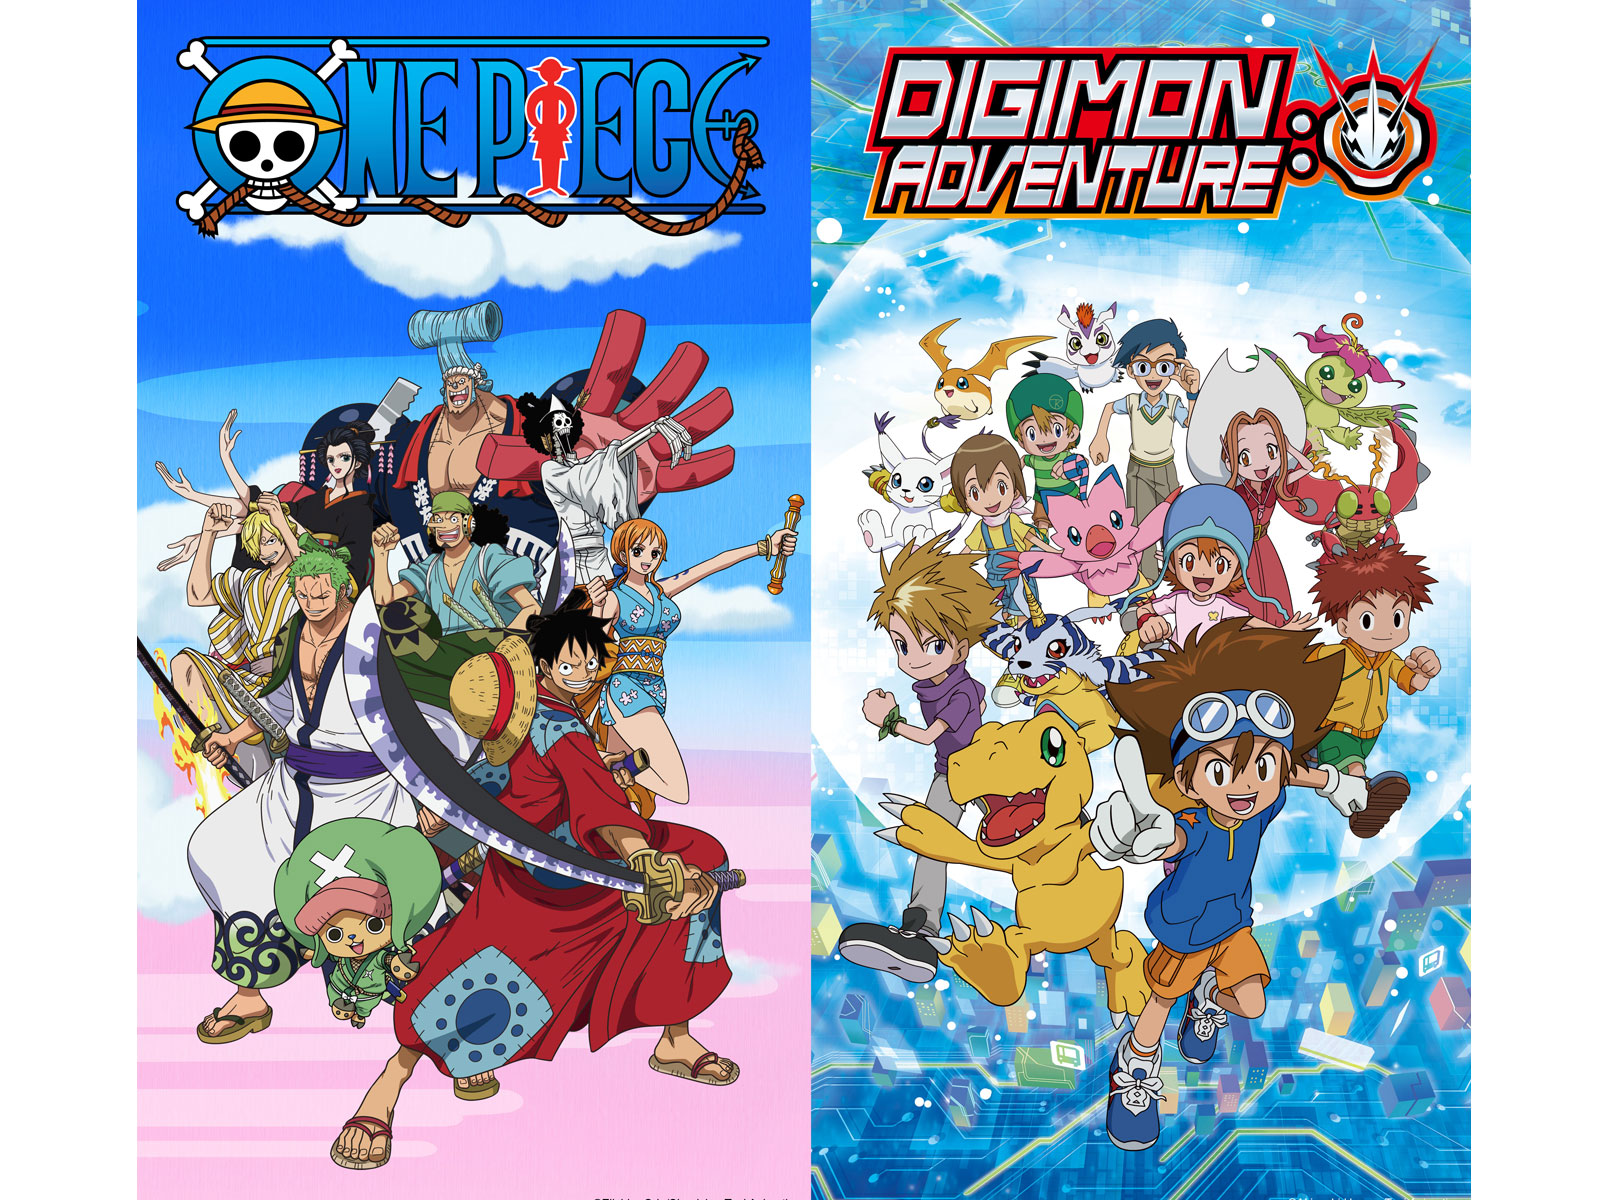 SPECIAL ANNOUNCEMENT: NEW EPISODES OF “ONE PIECE” & “DIGIMON ADVENTURE:” SET TO RESUME SOON!